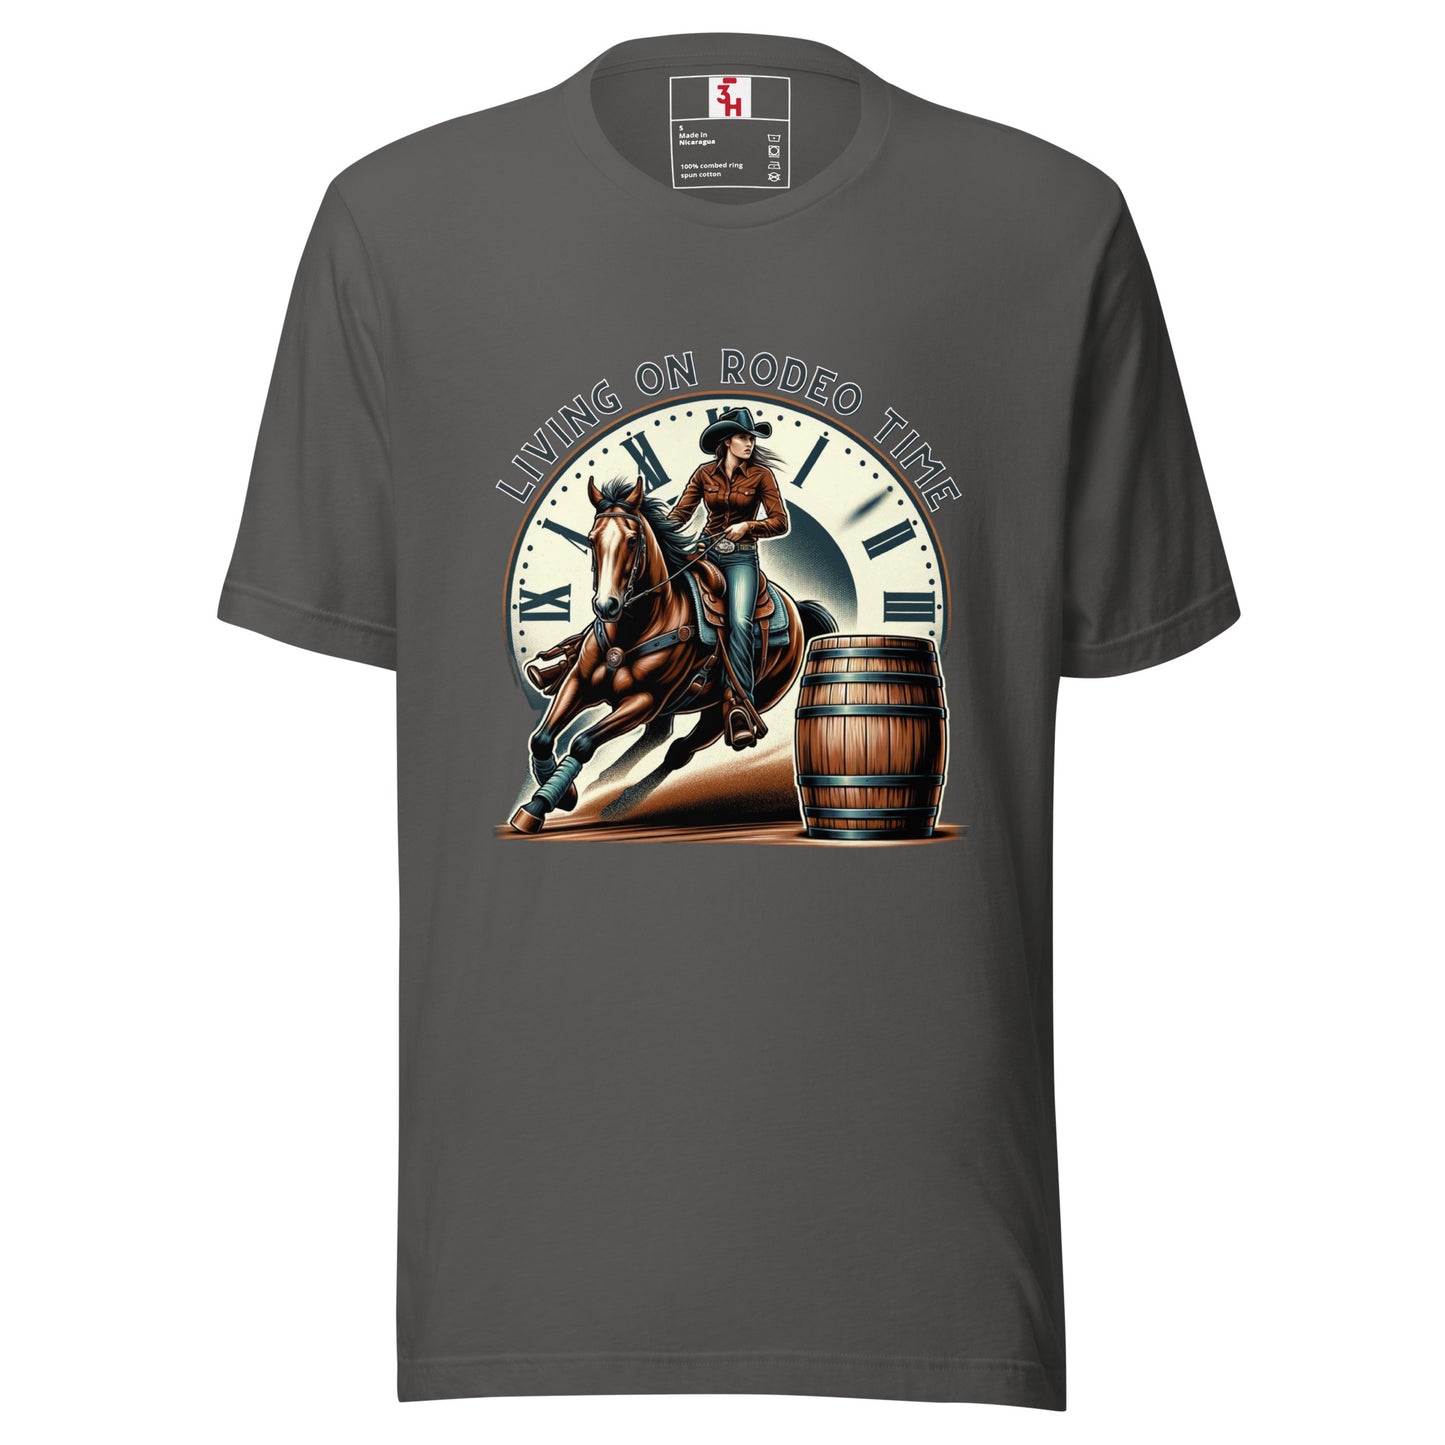 Living on Rodeo Time - Graphic Tee